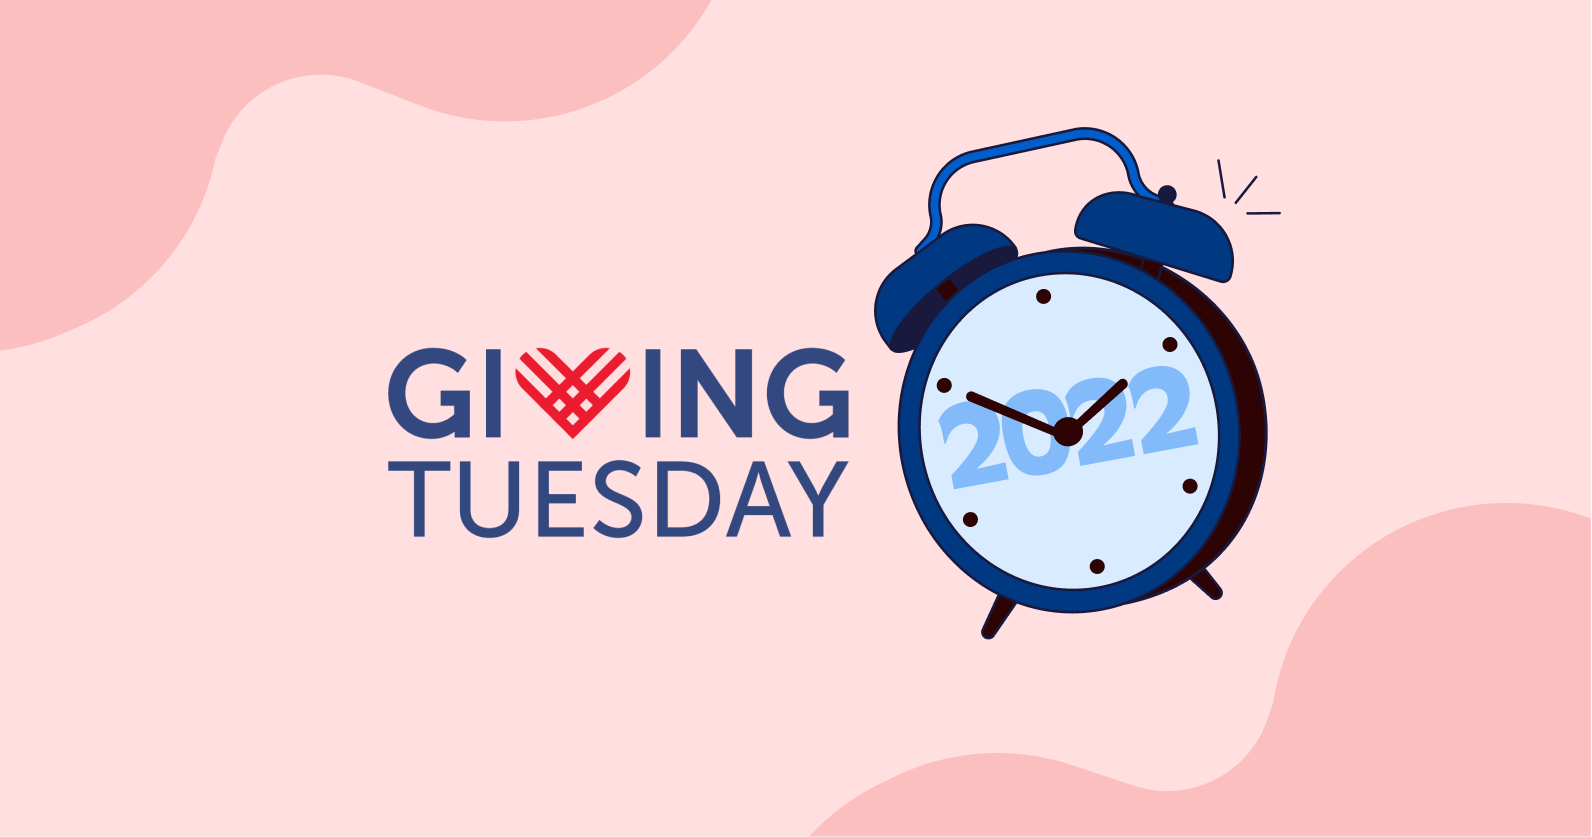 Illustration of the GivingTuesday logo and a clock with 2022 on it sounding an alarm.